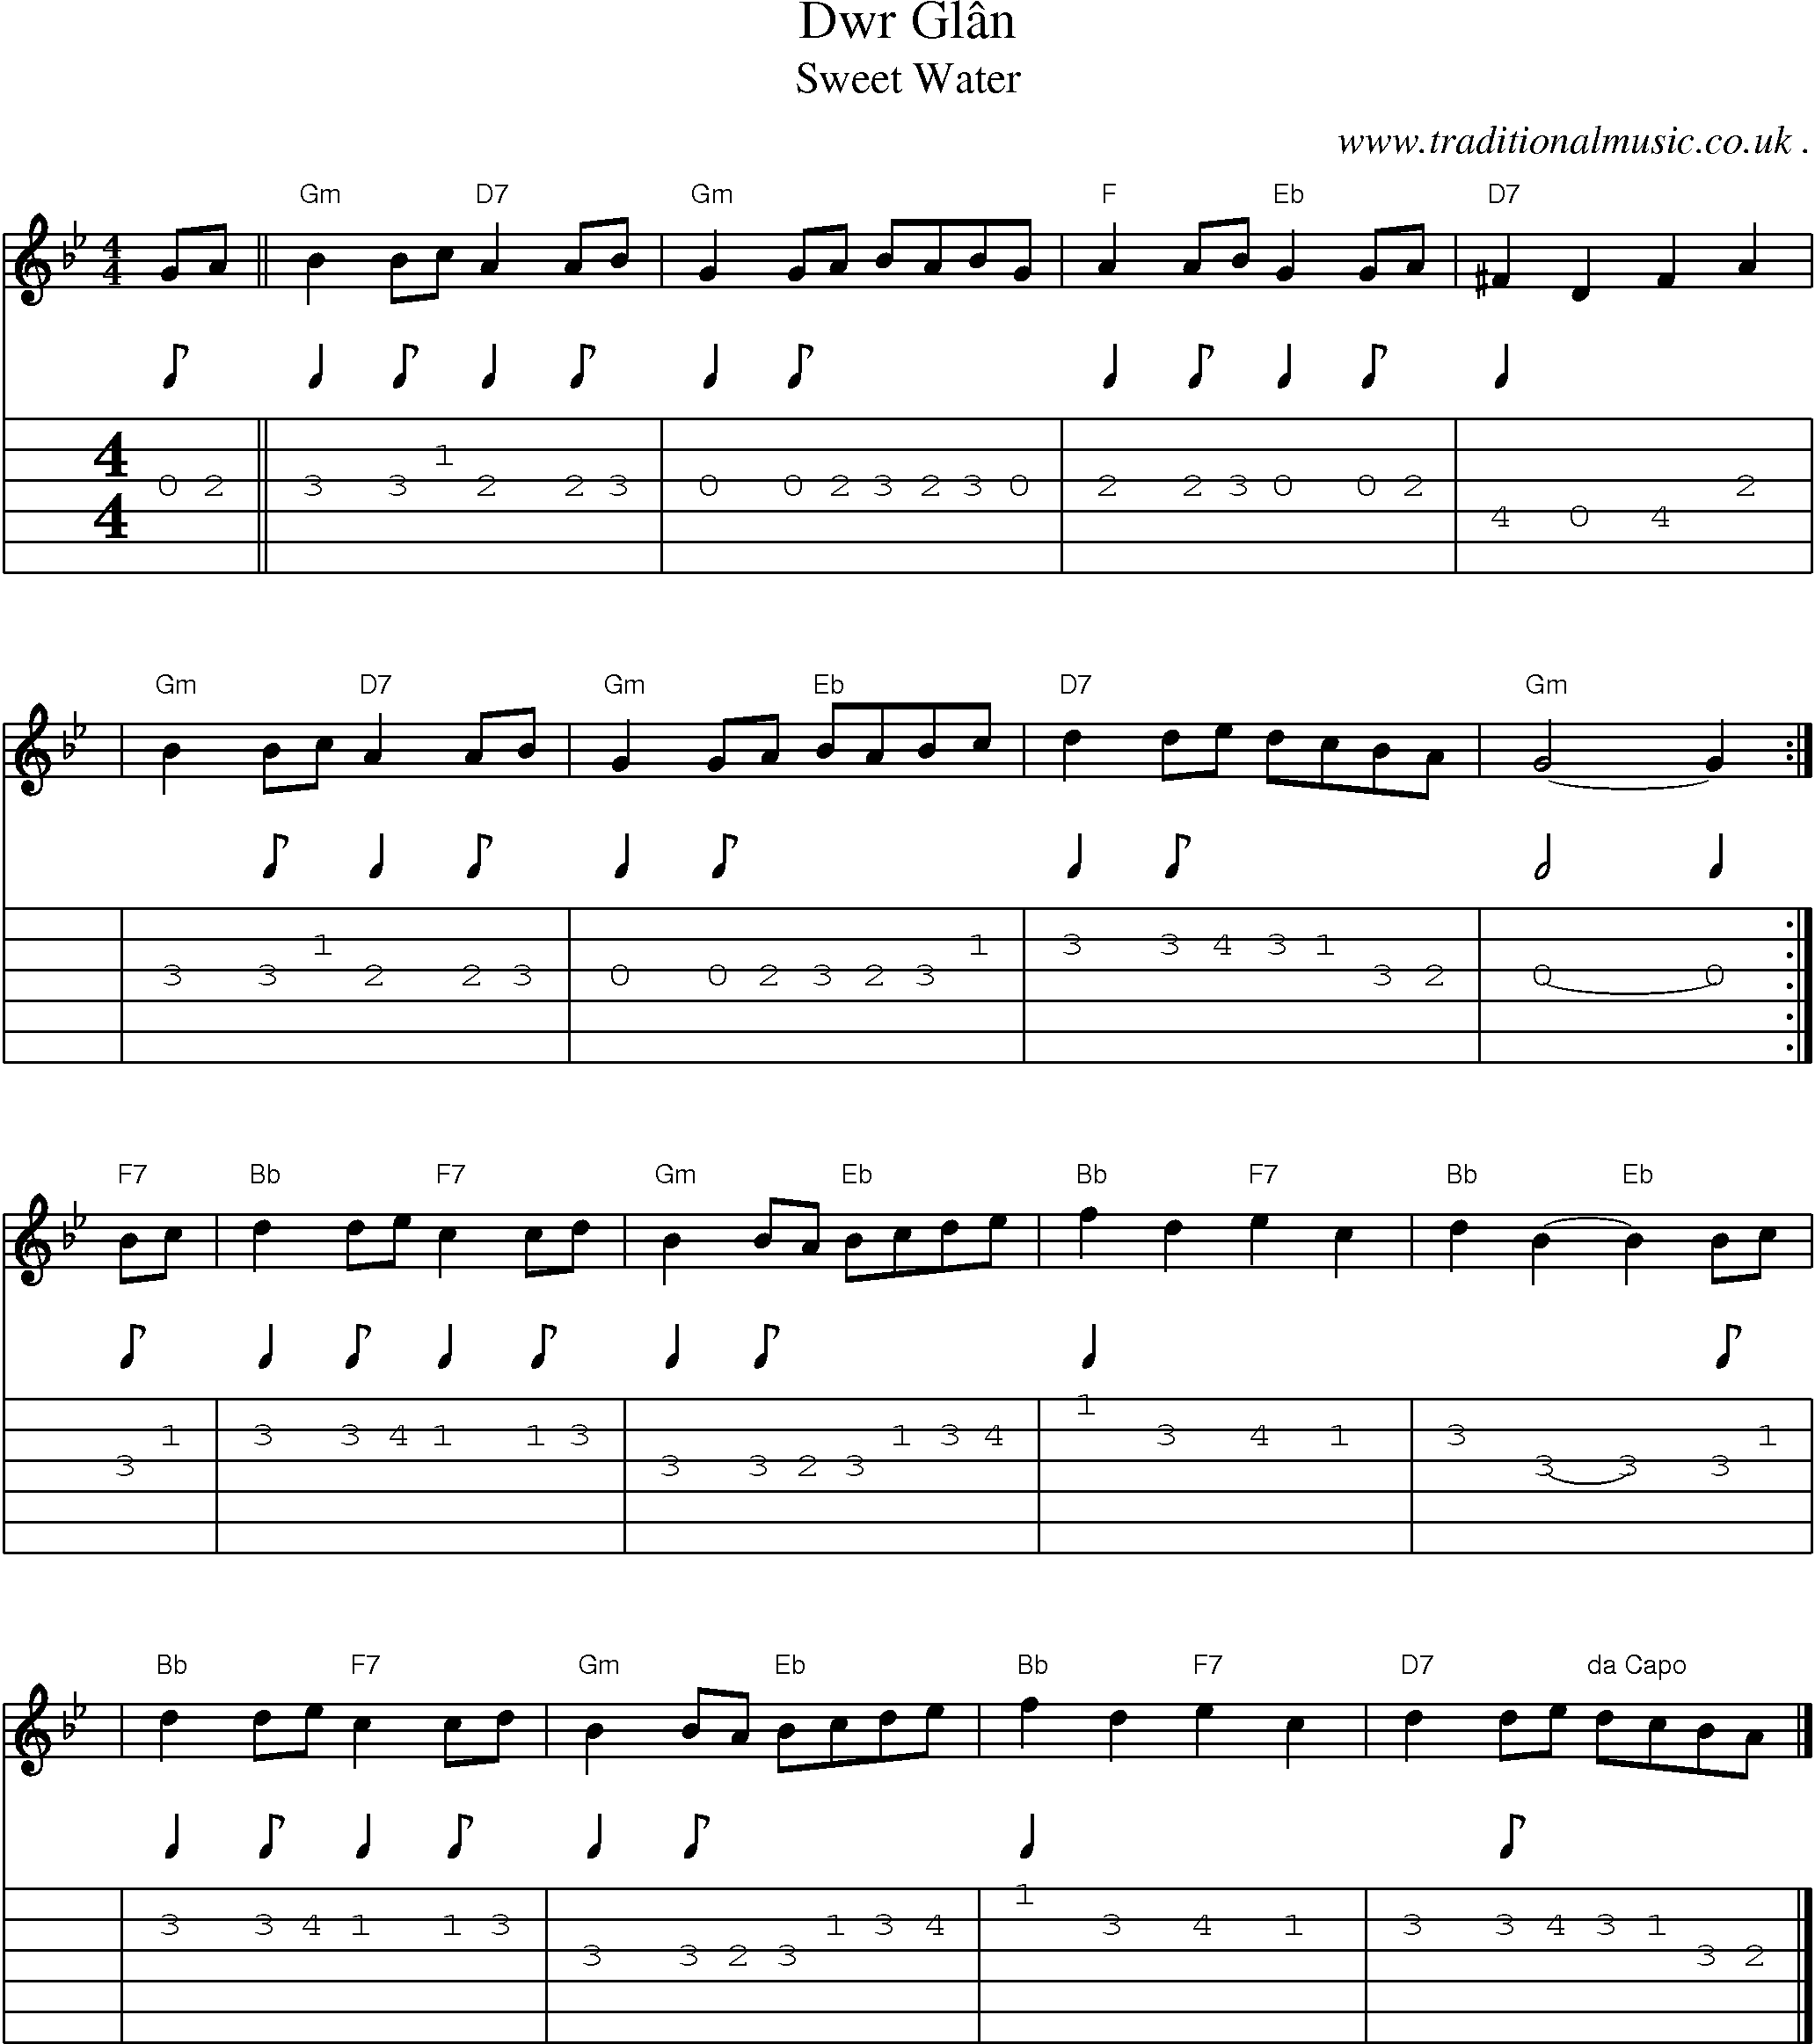 Sheet-music  score, Chords and Guitar Tabs for Dwr Glan